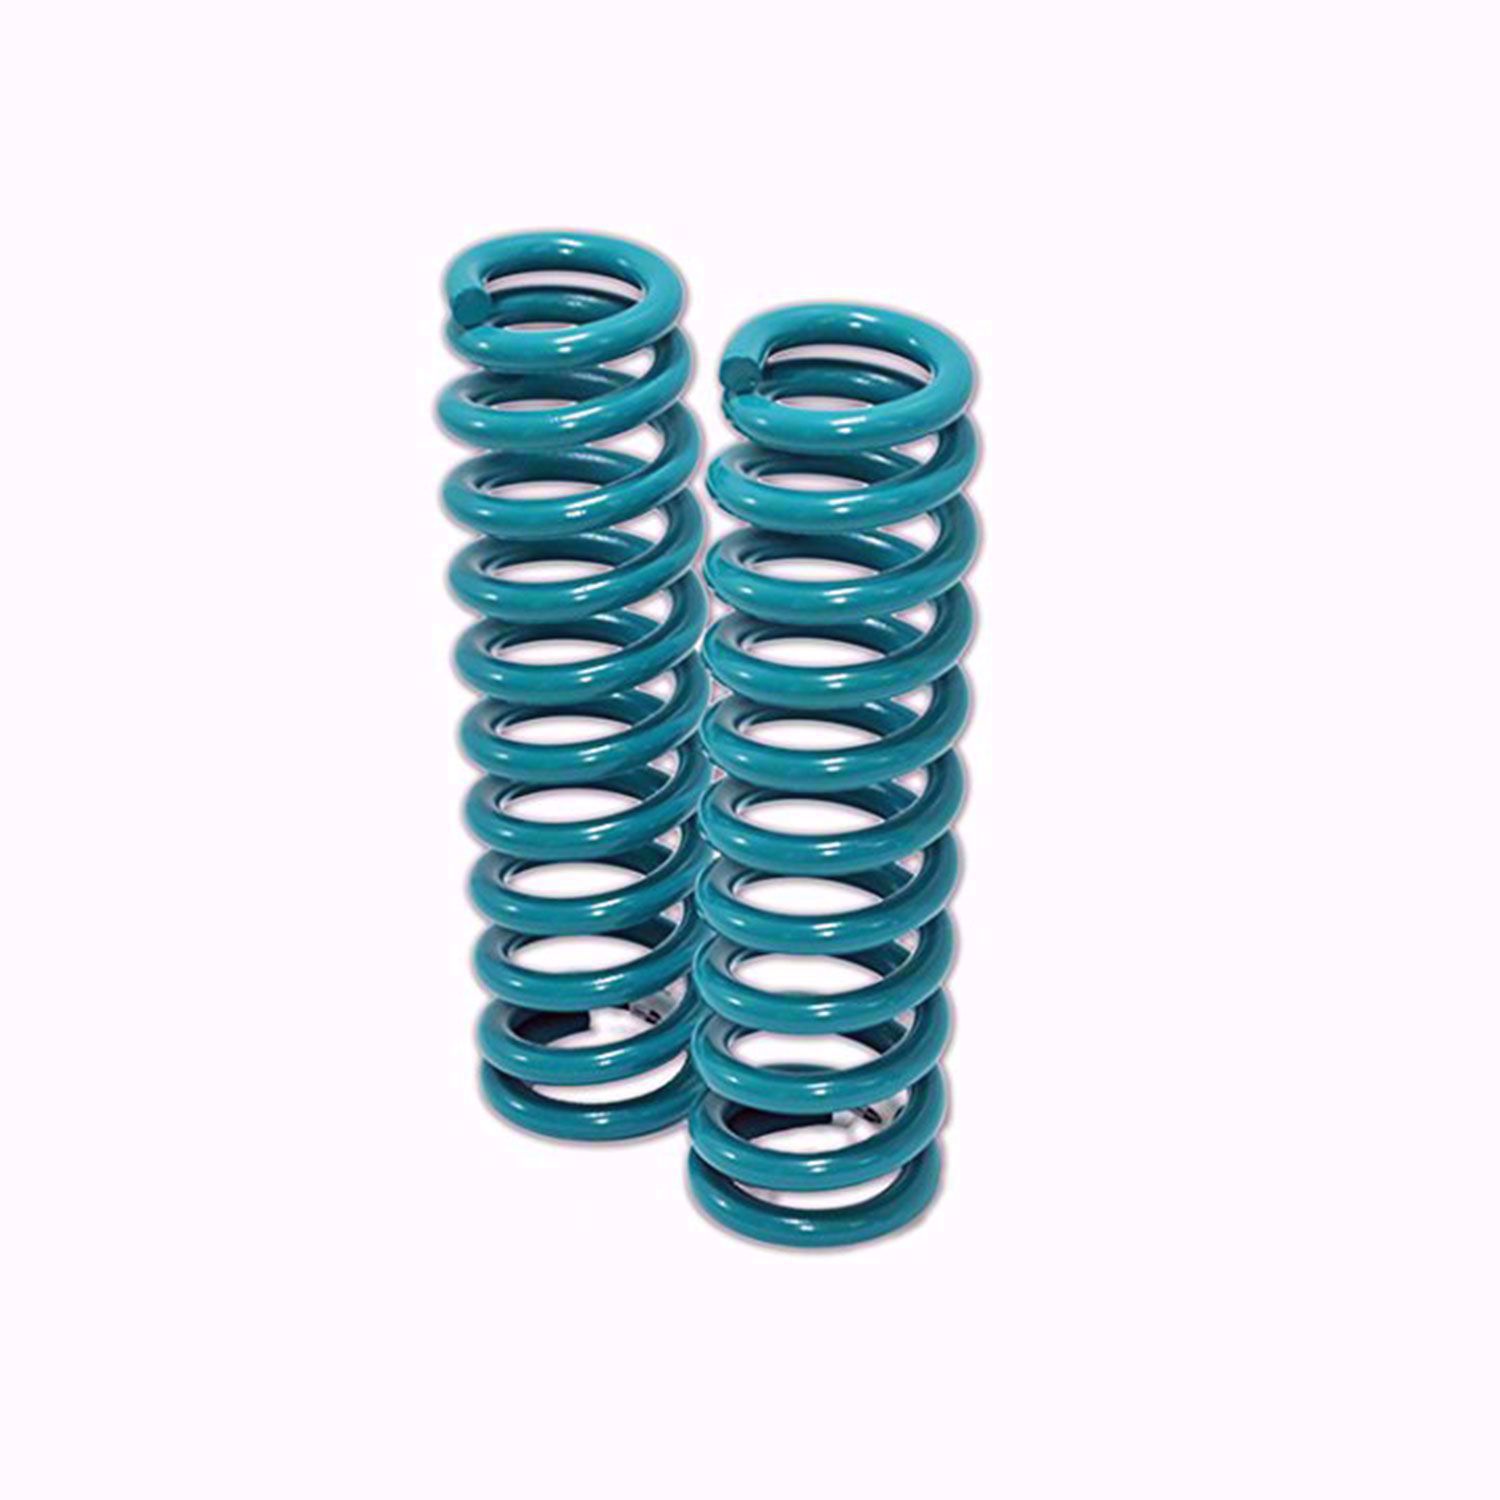 Alldogs Offroad Coop. Dobinsons C59-302 Coil Springs Pair